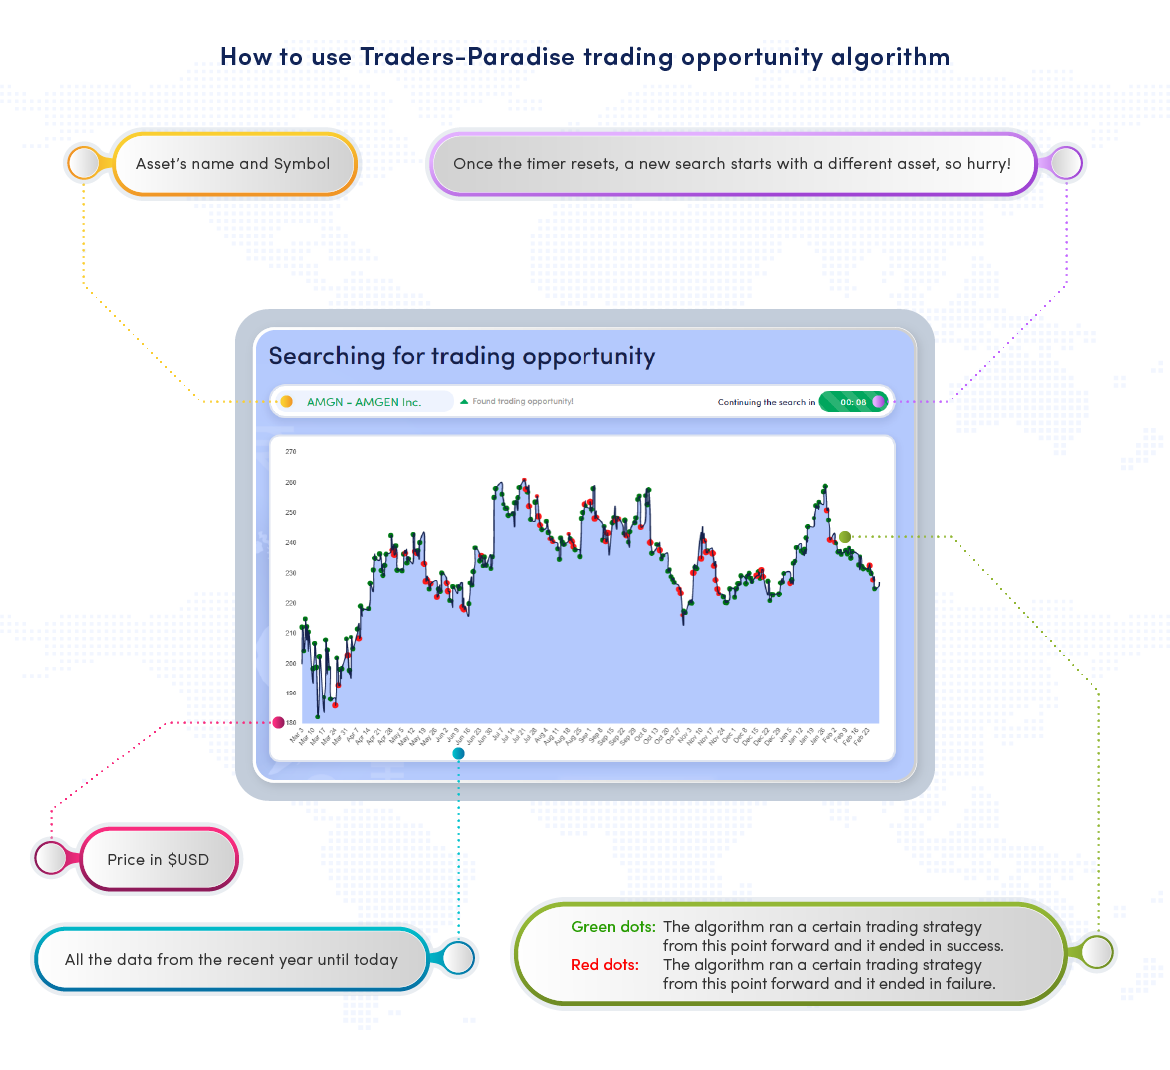 How to use traders-paradise trading opportunities algorithm